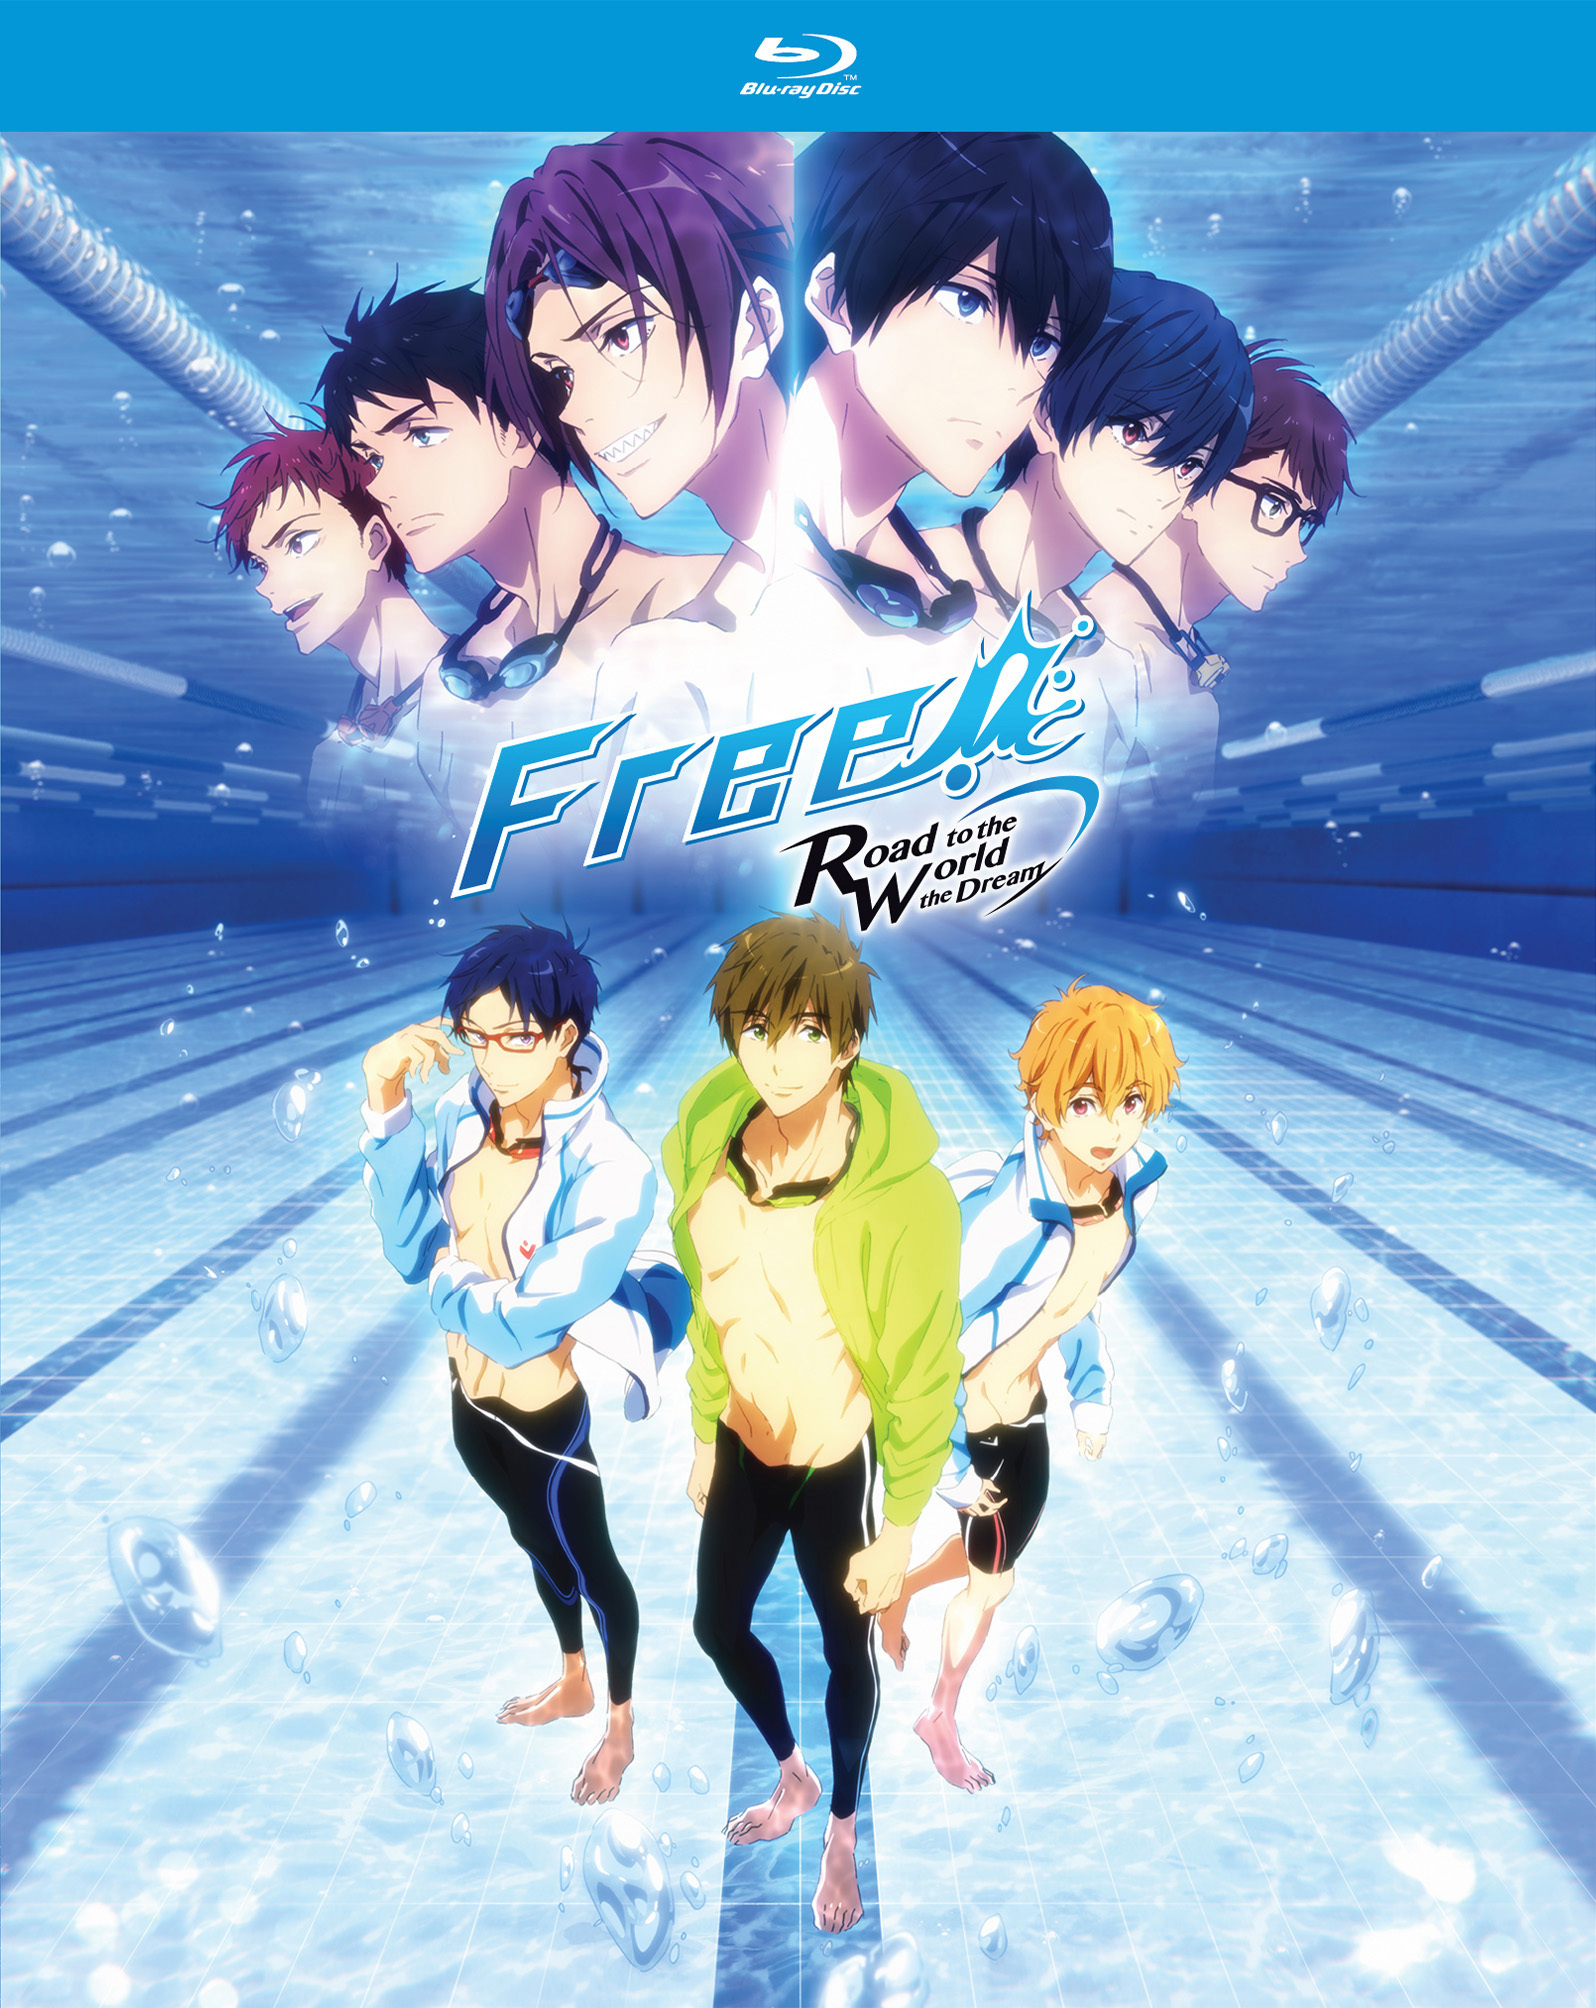 Free! Road To The World: The Dream - The Movie - Blu-ray [ 2015 ]  - Anime Movies On Blu-ray - Movies On GRUV